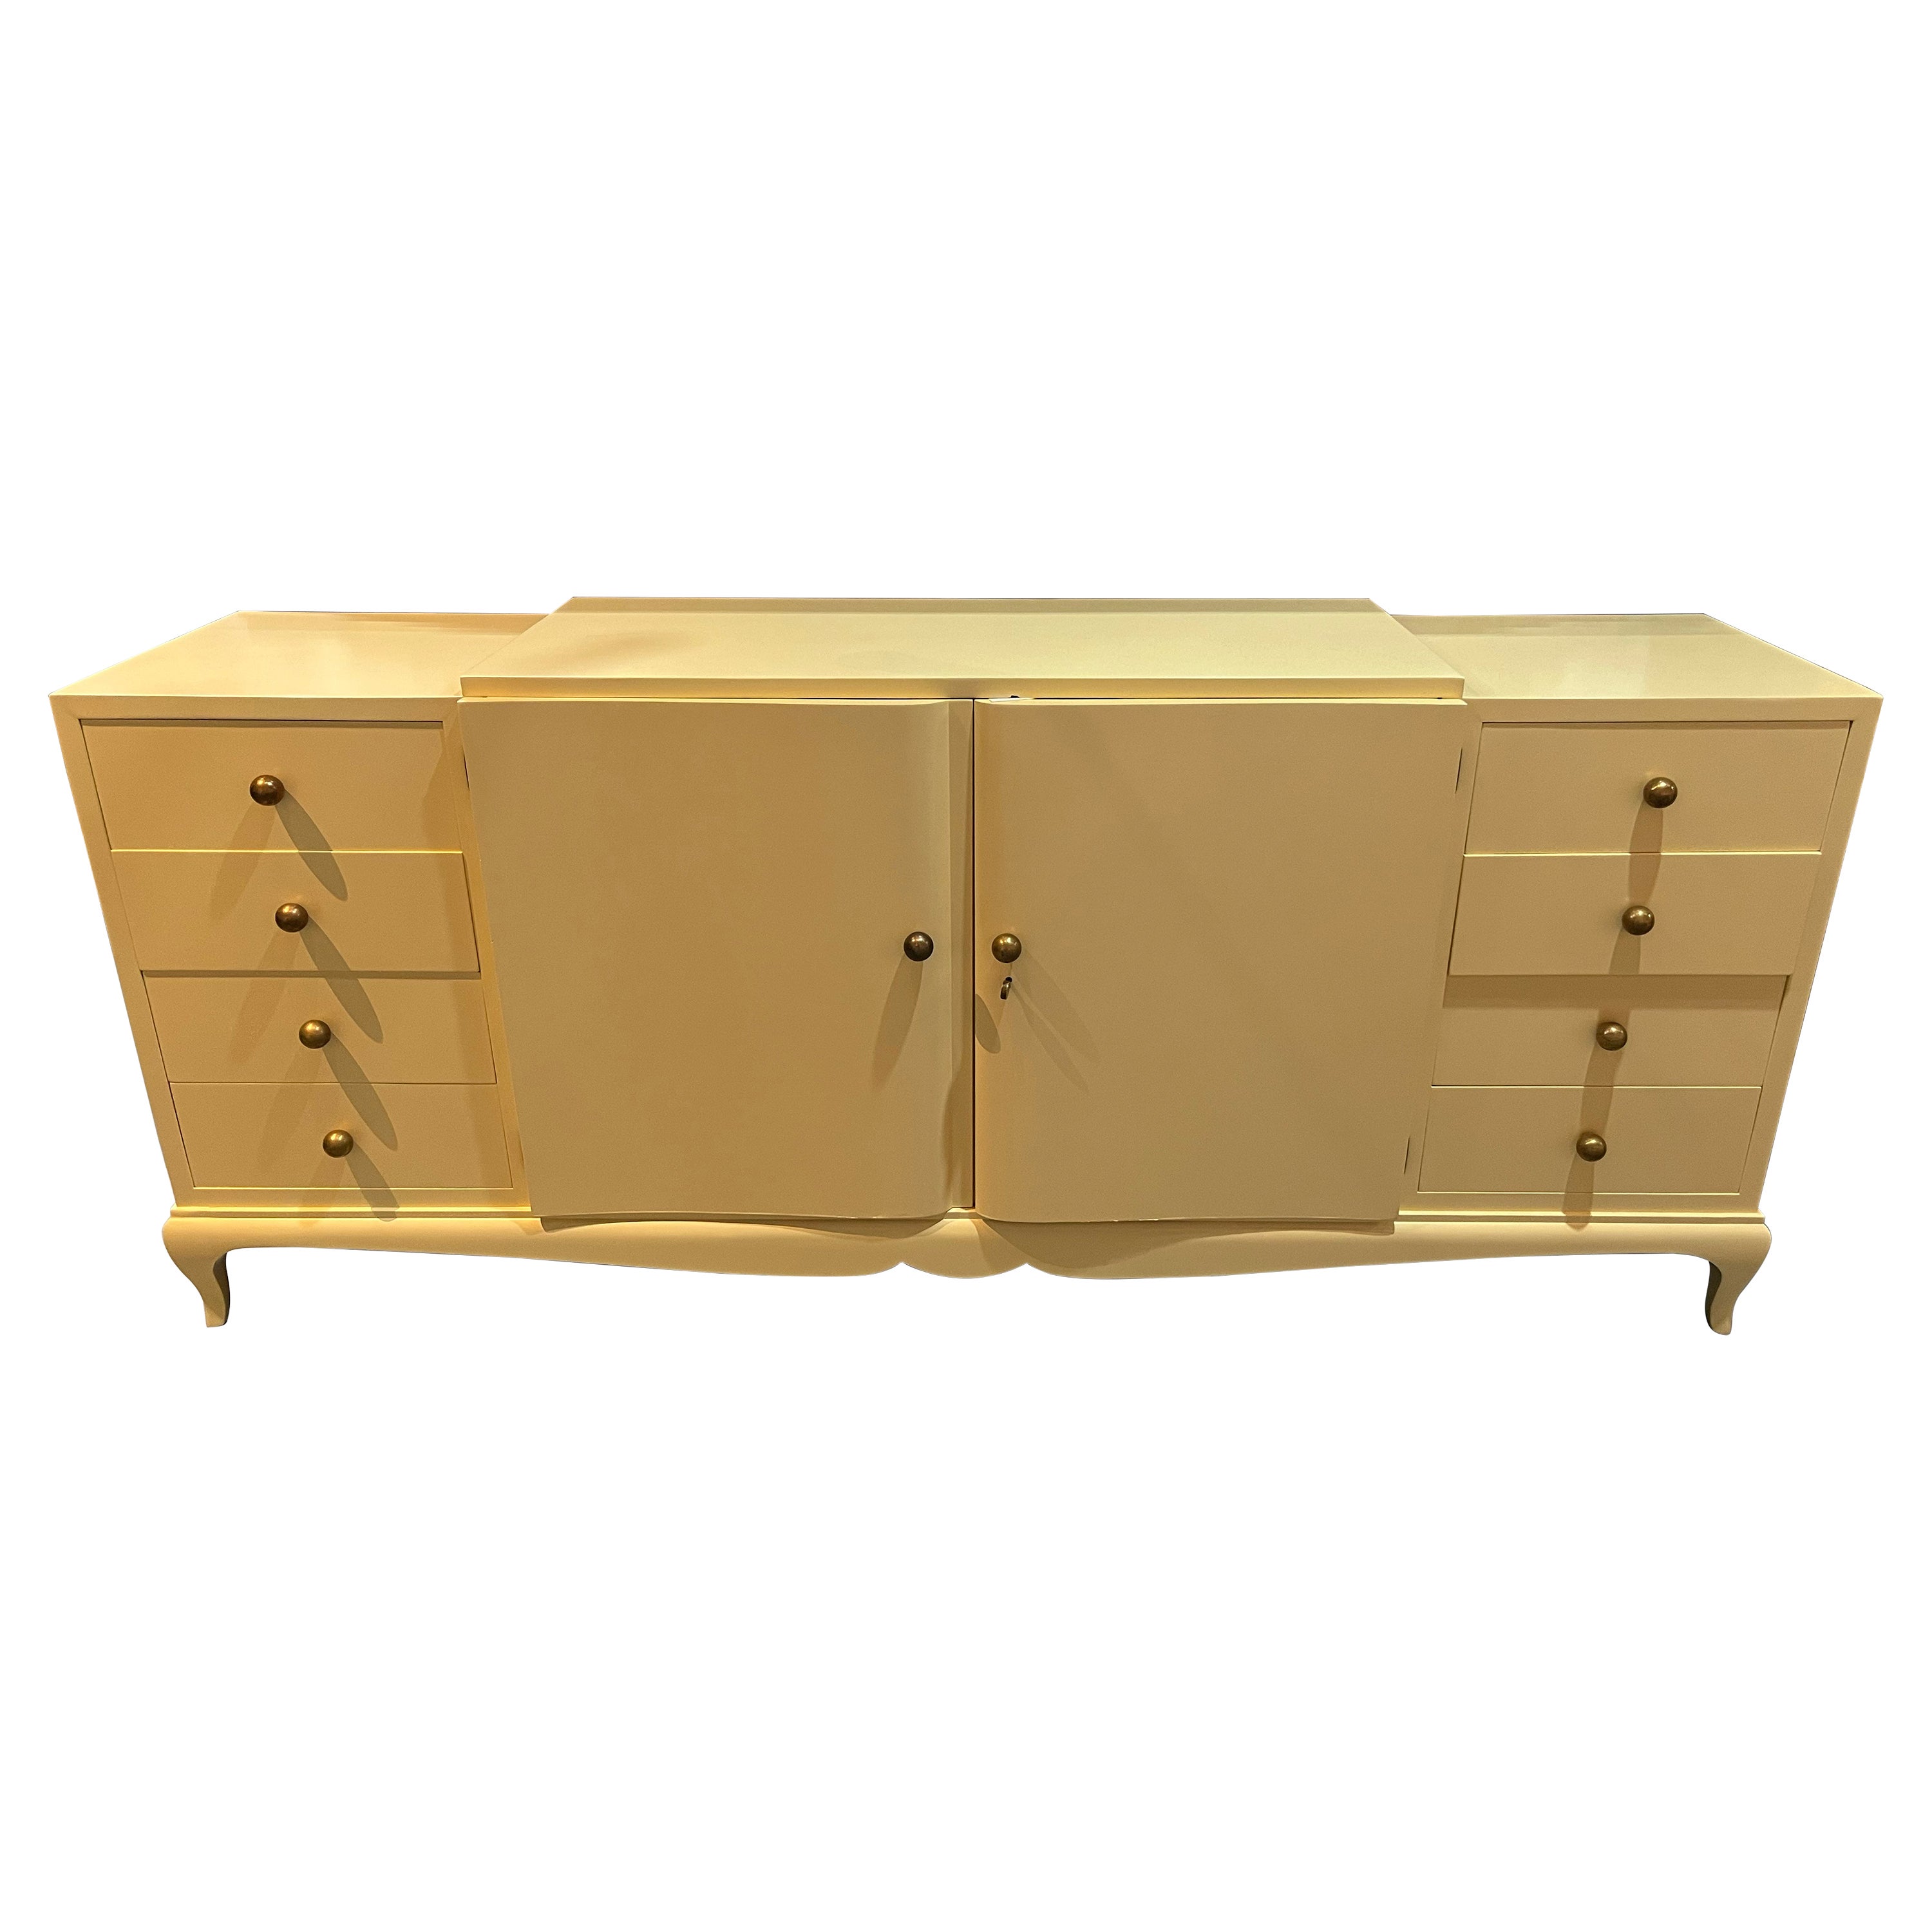 French Art Deco Period Sideboard in the style of André Arbus For Sale